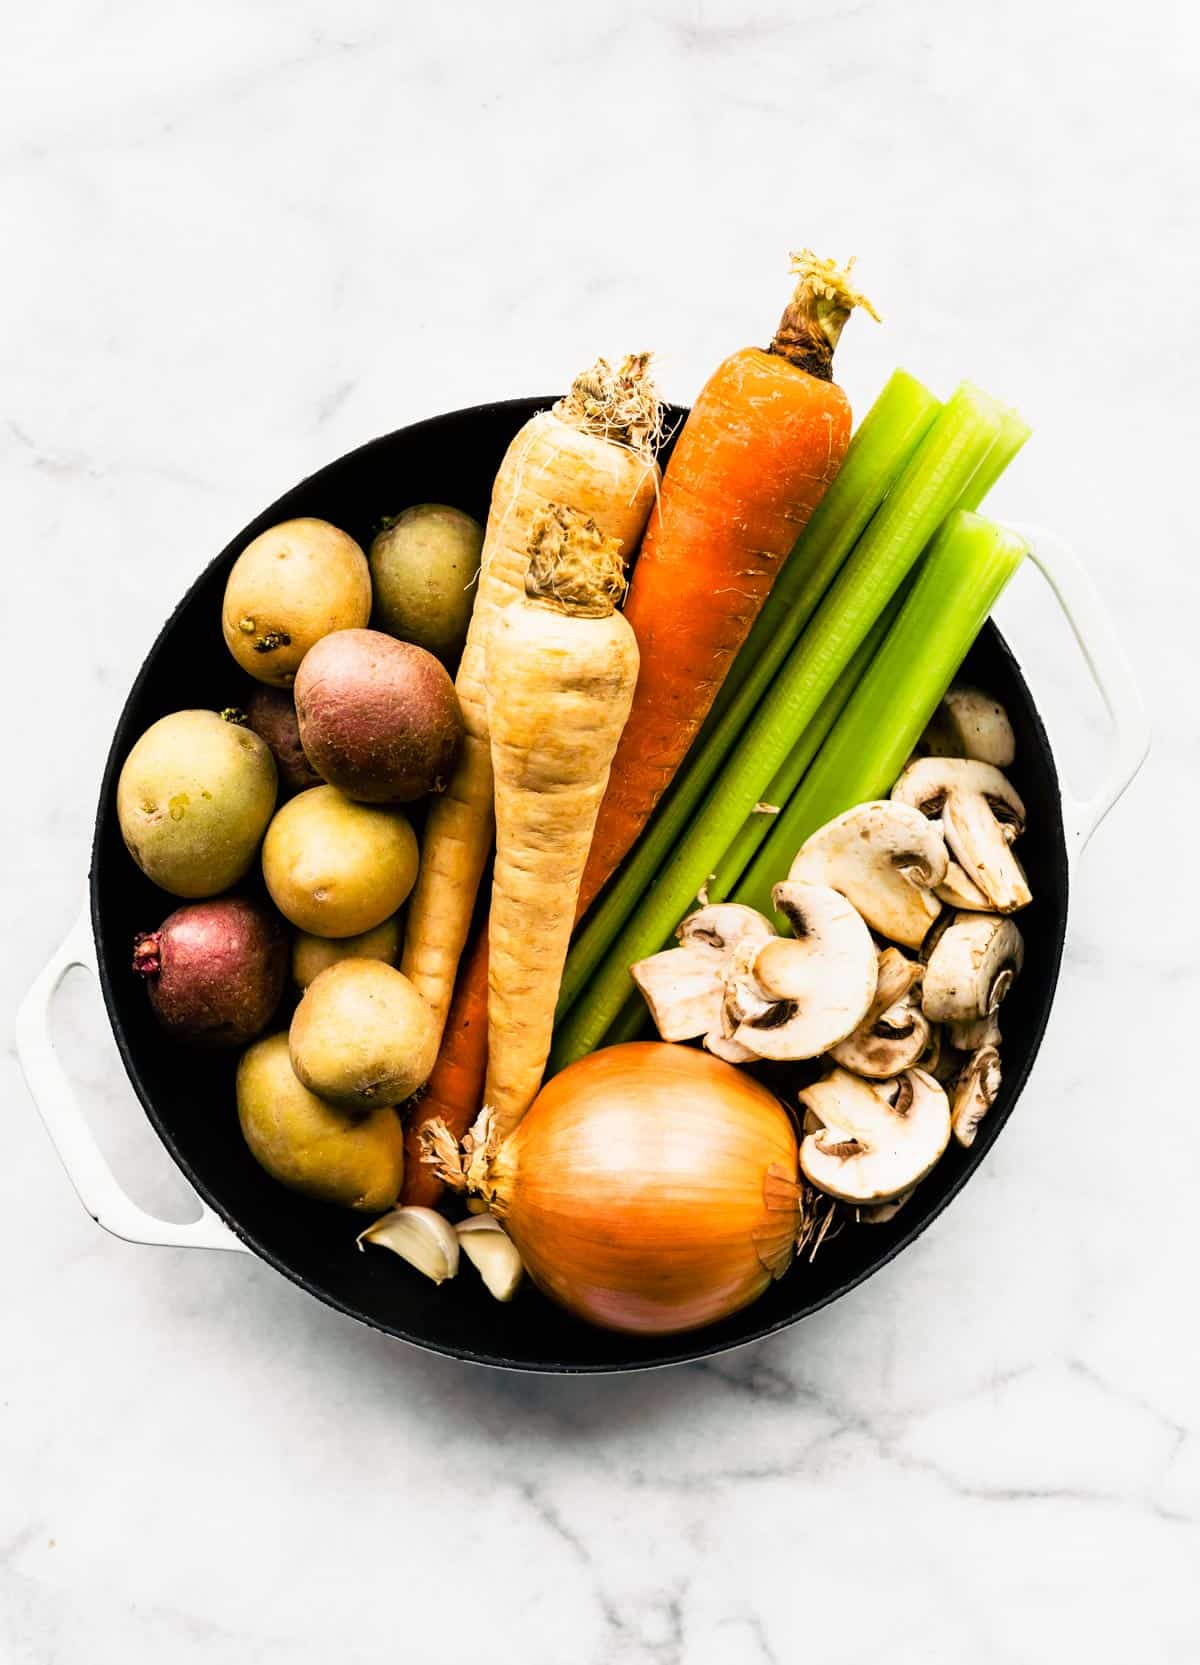 Potatoes, carrots, onions, celery, and mushrooms in a bowl